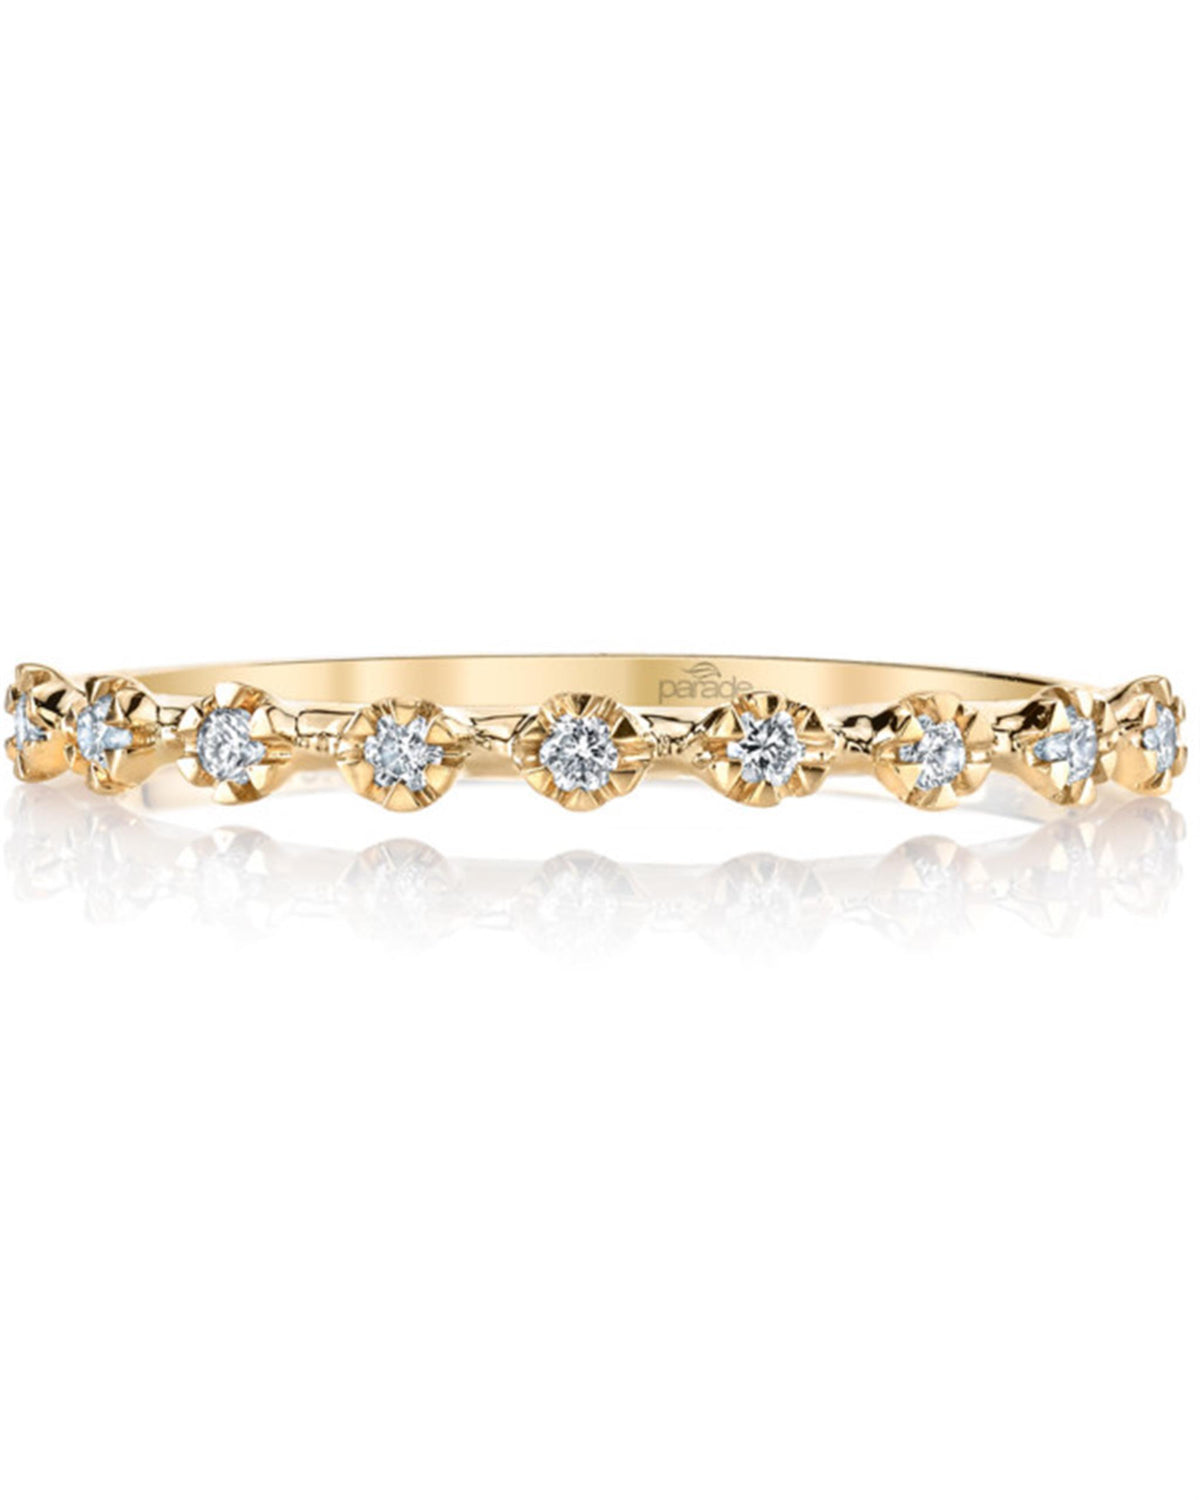 18Kt Rose Gold Eternity Wedding Ring With 0.22cttw Natural Diamonds